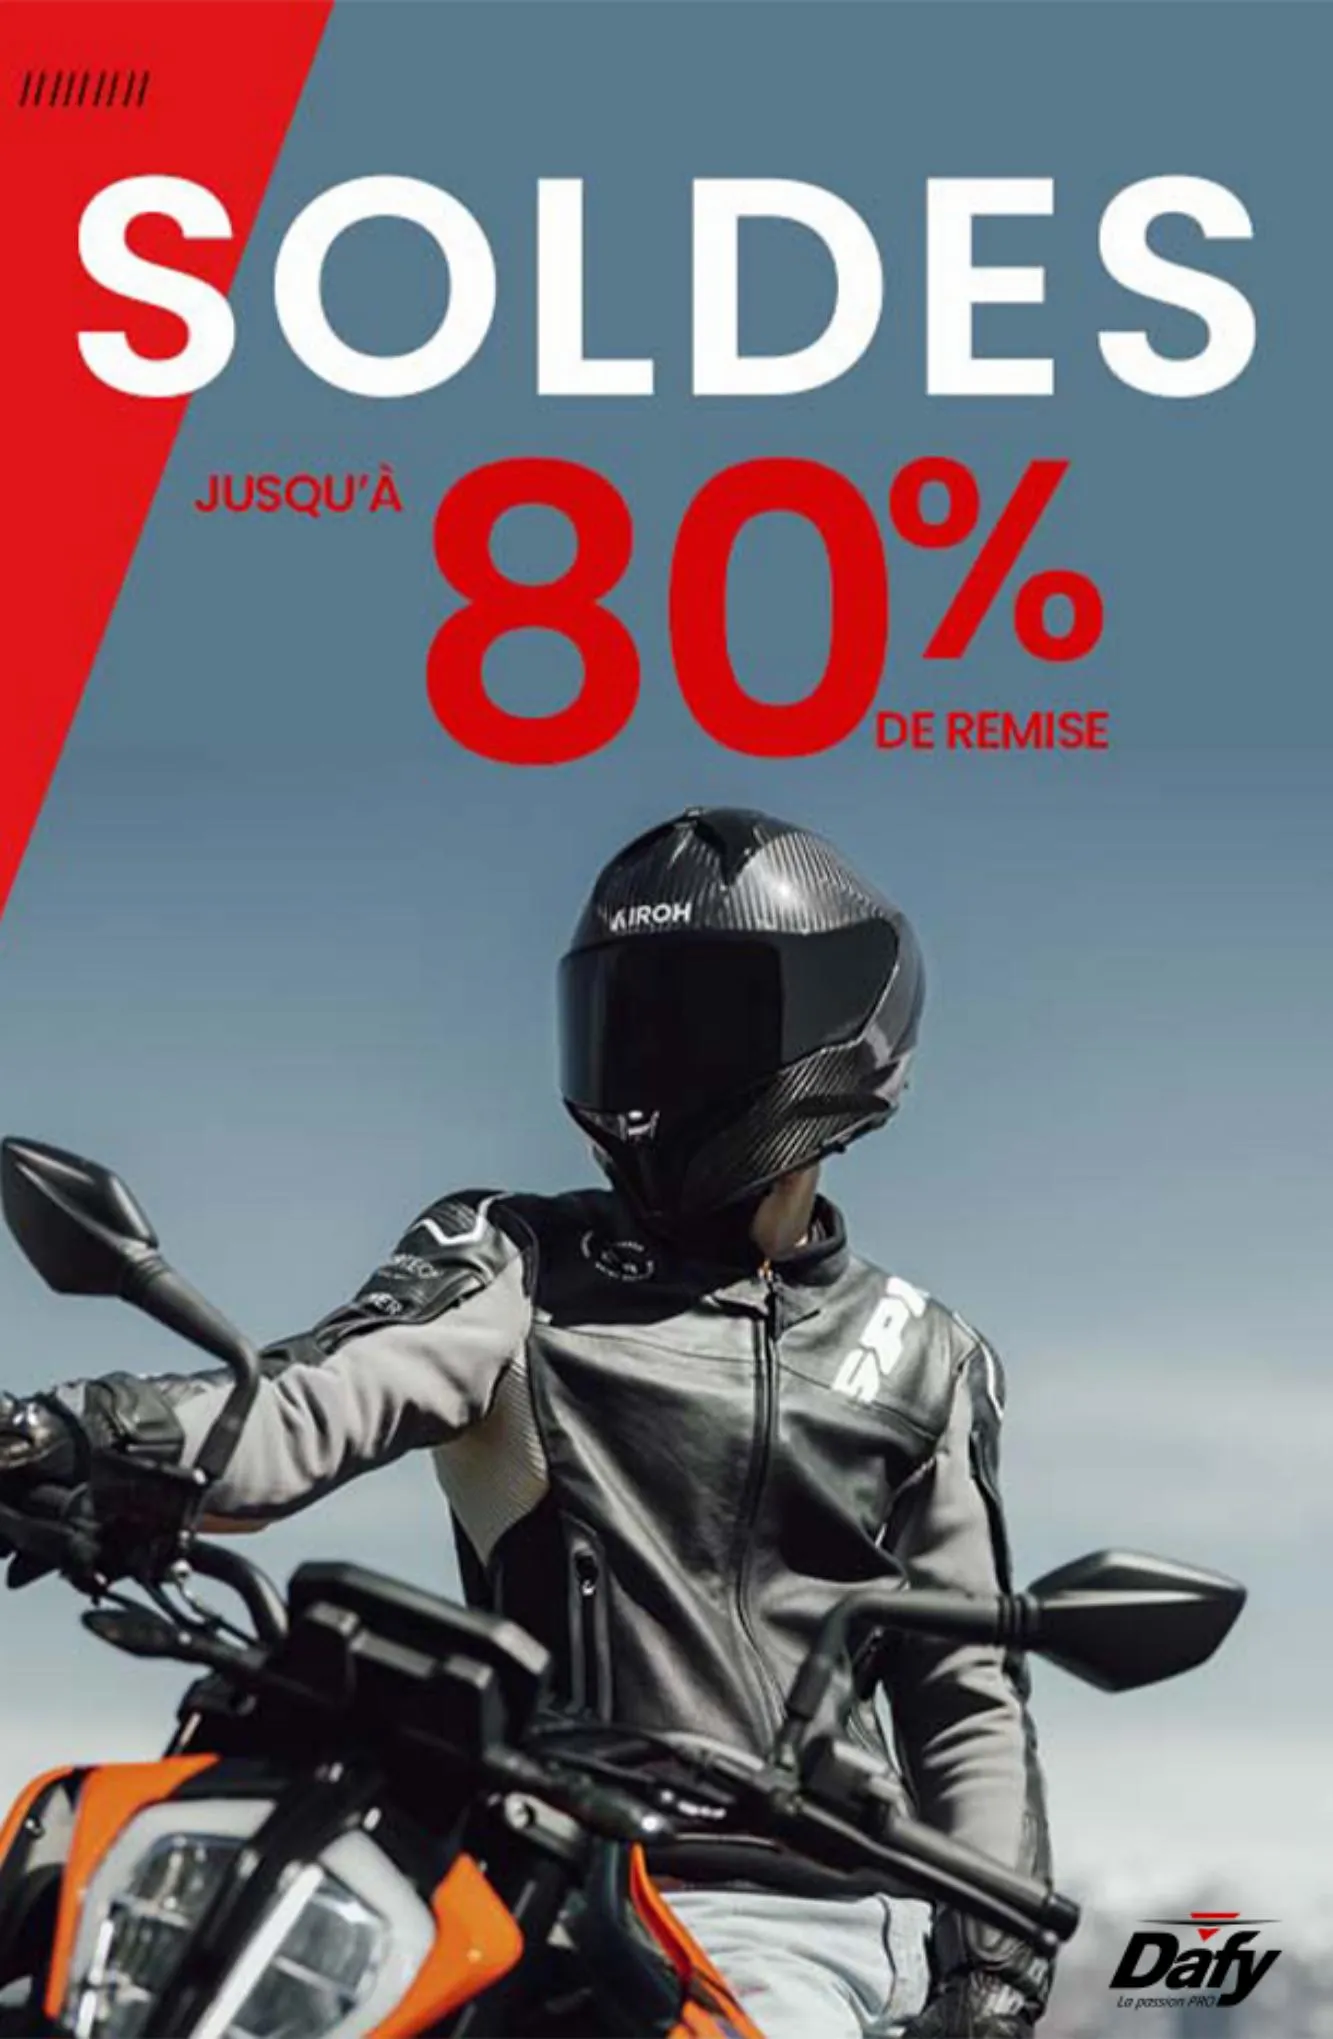 Catalogue SOLDES 80% Dafy Moto, page 00001